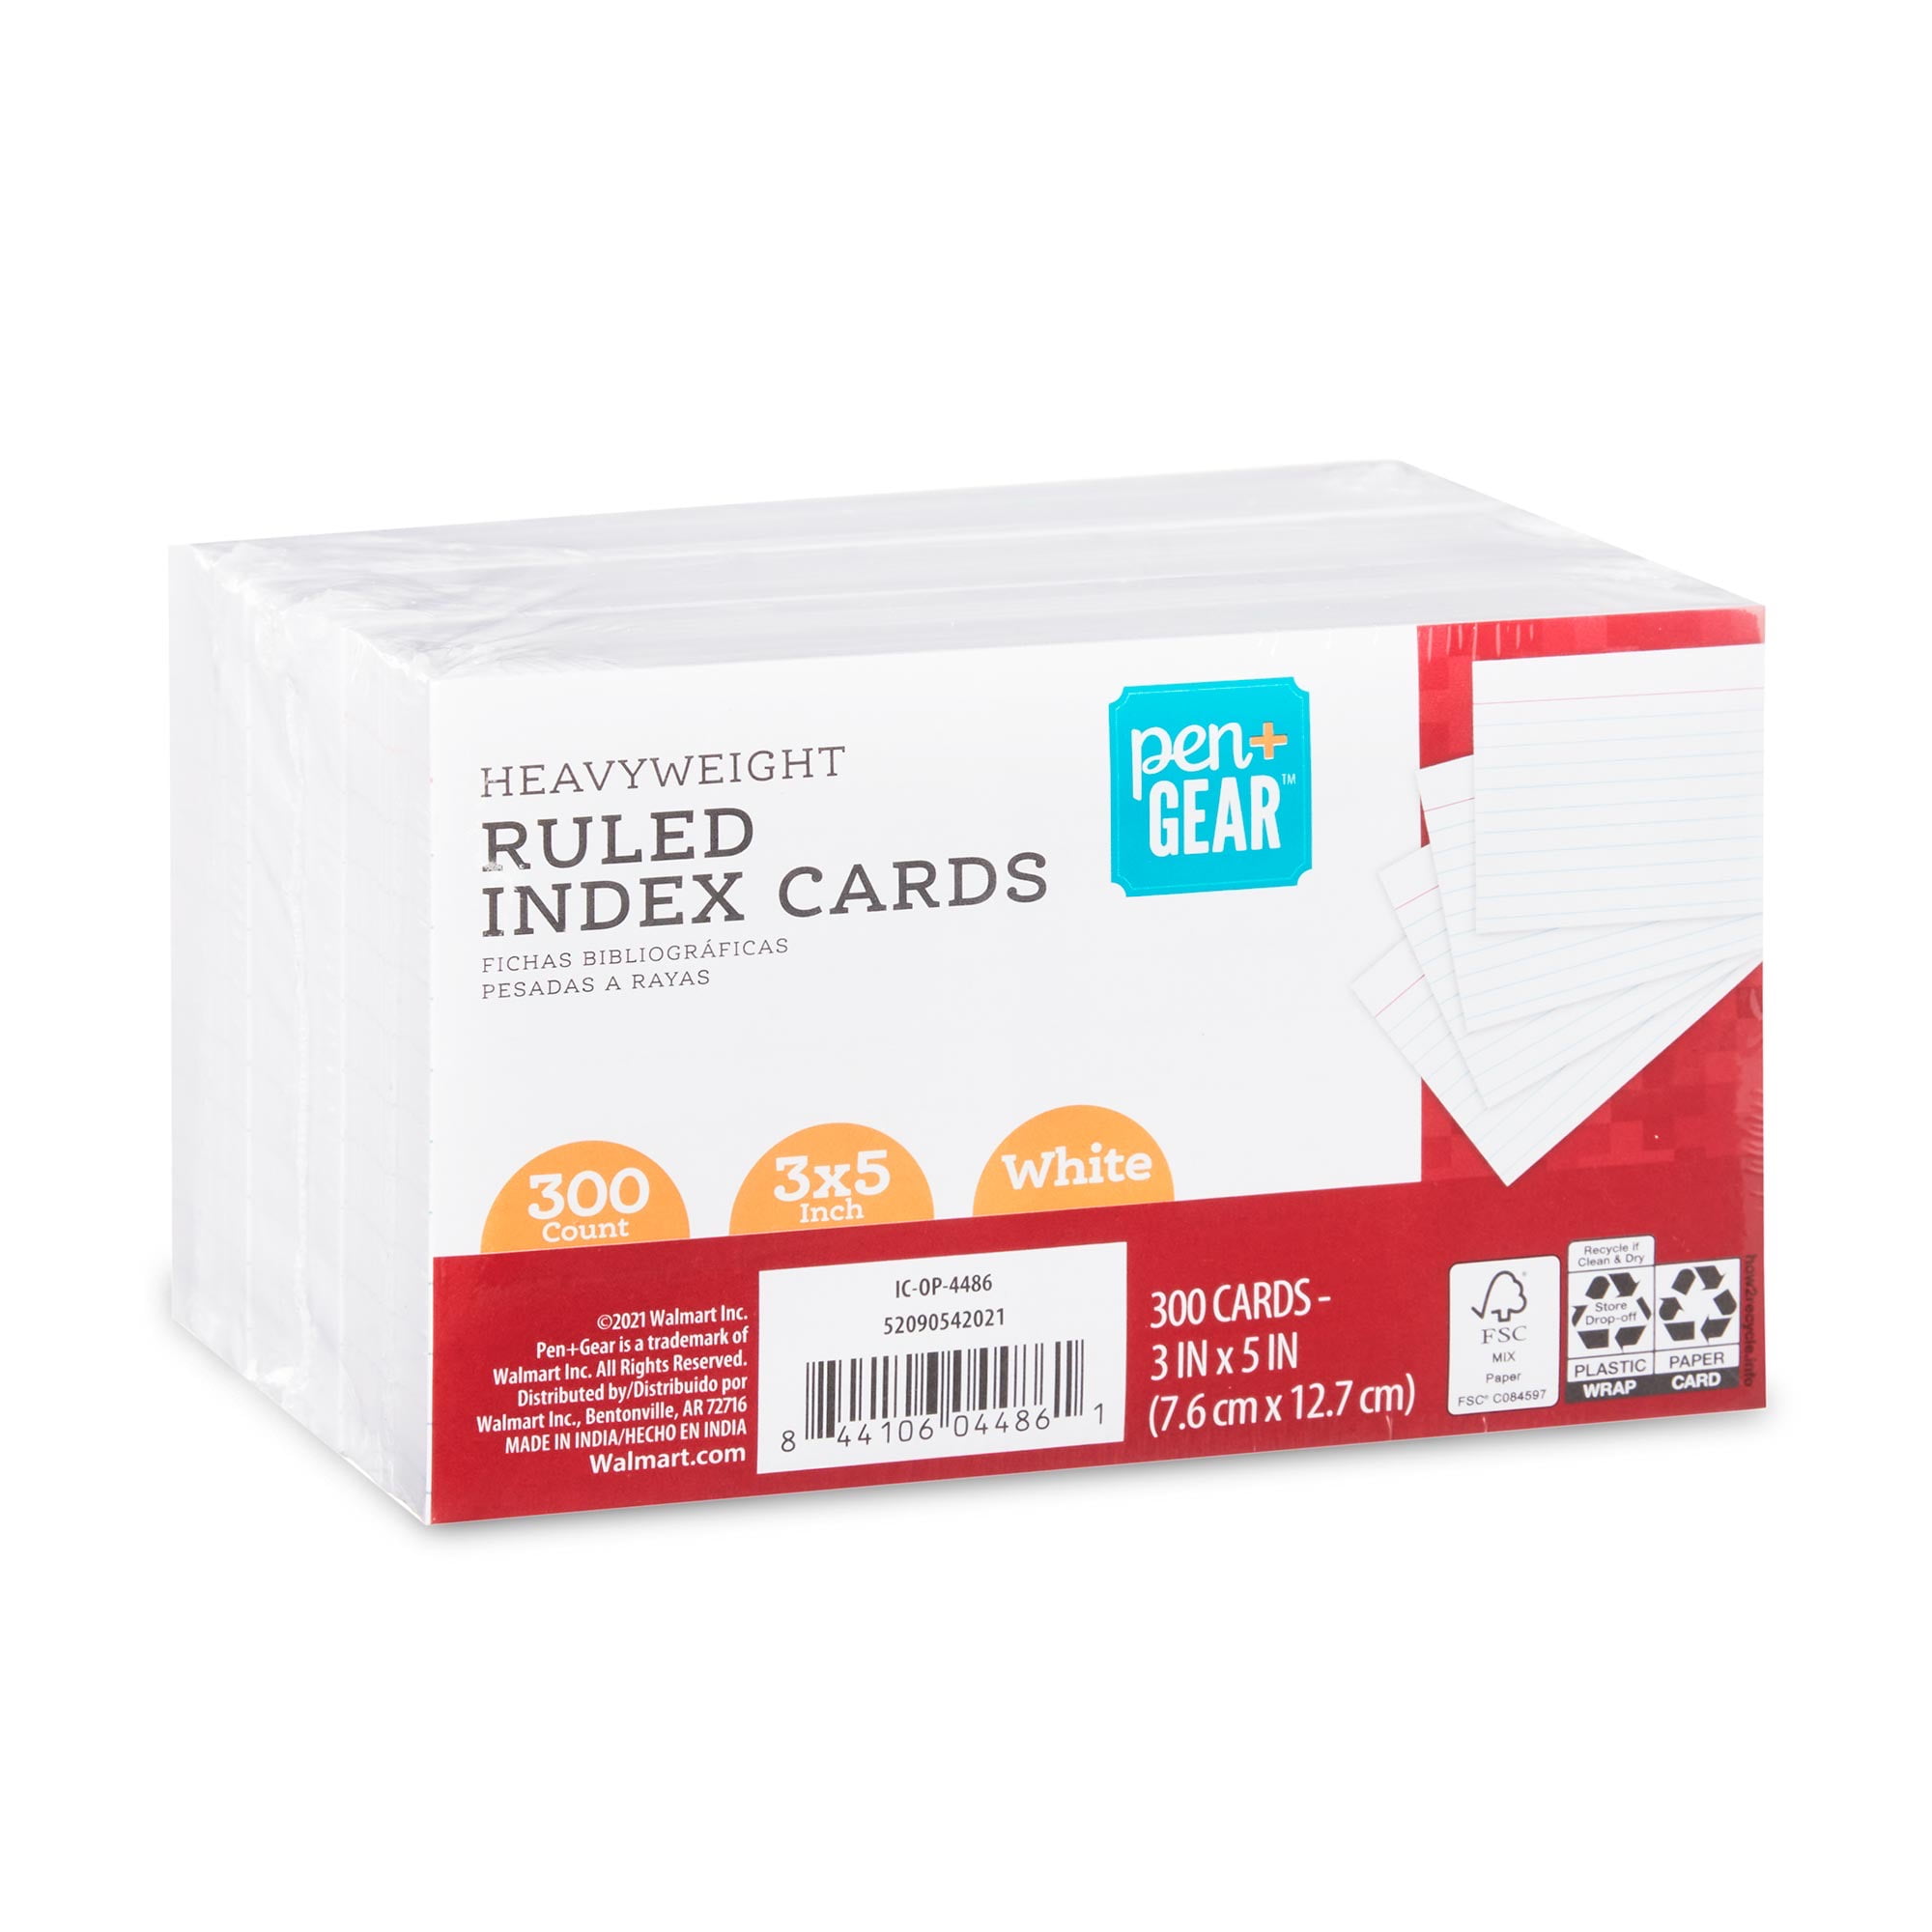 Pen+gear Heavyweight Index Cards, Ruled, White, 300 Count, 3 x 5